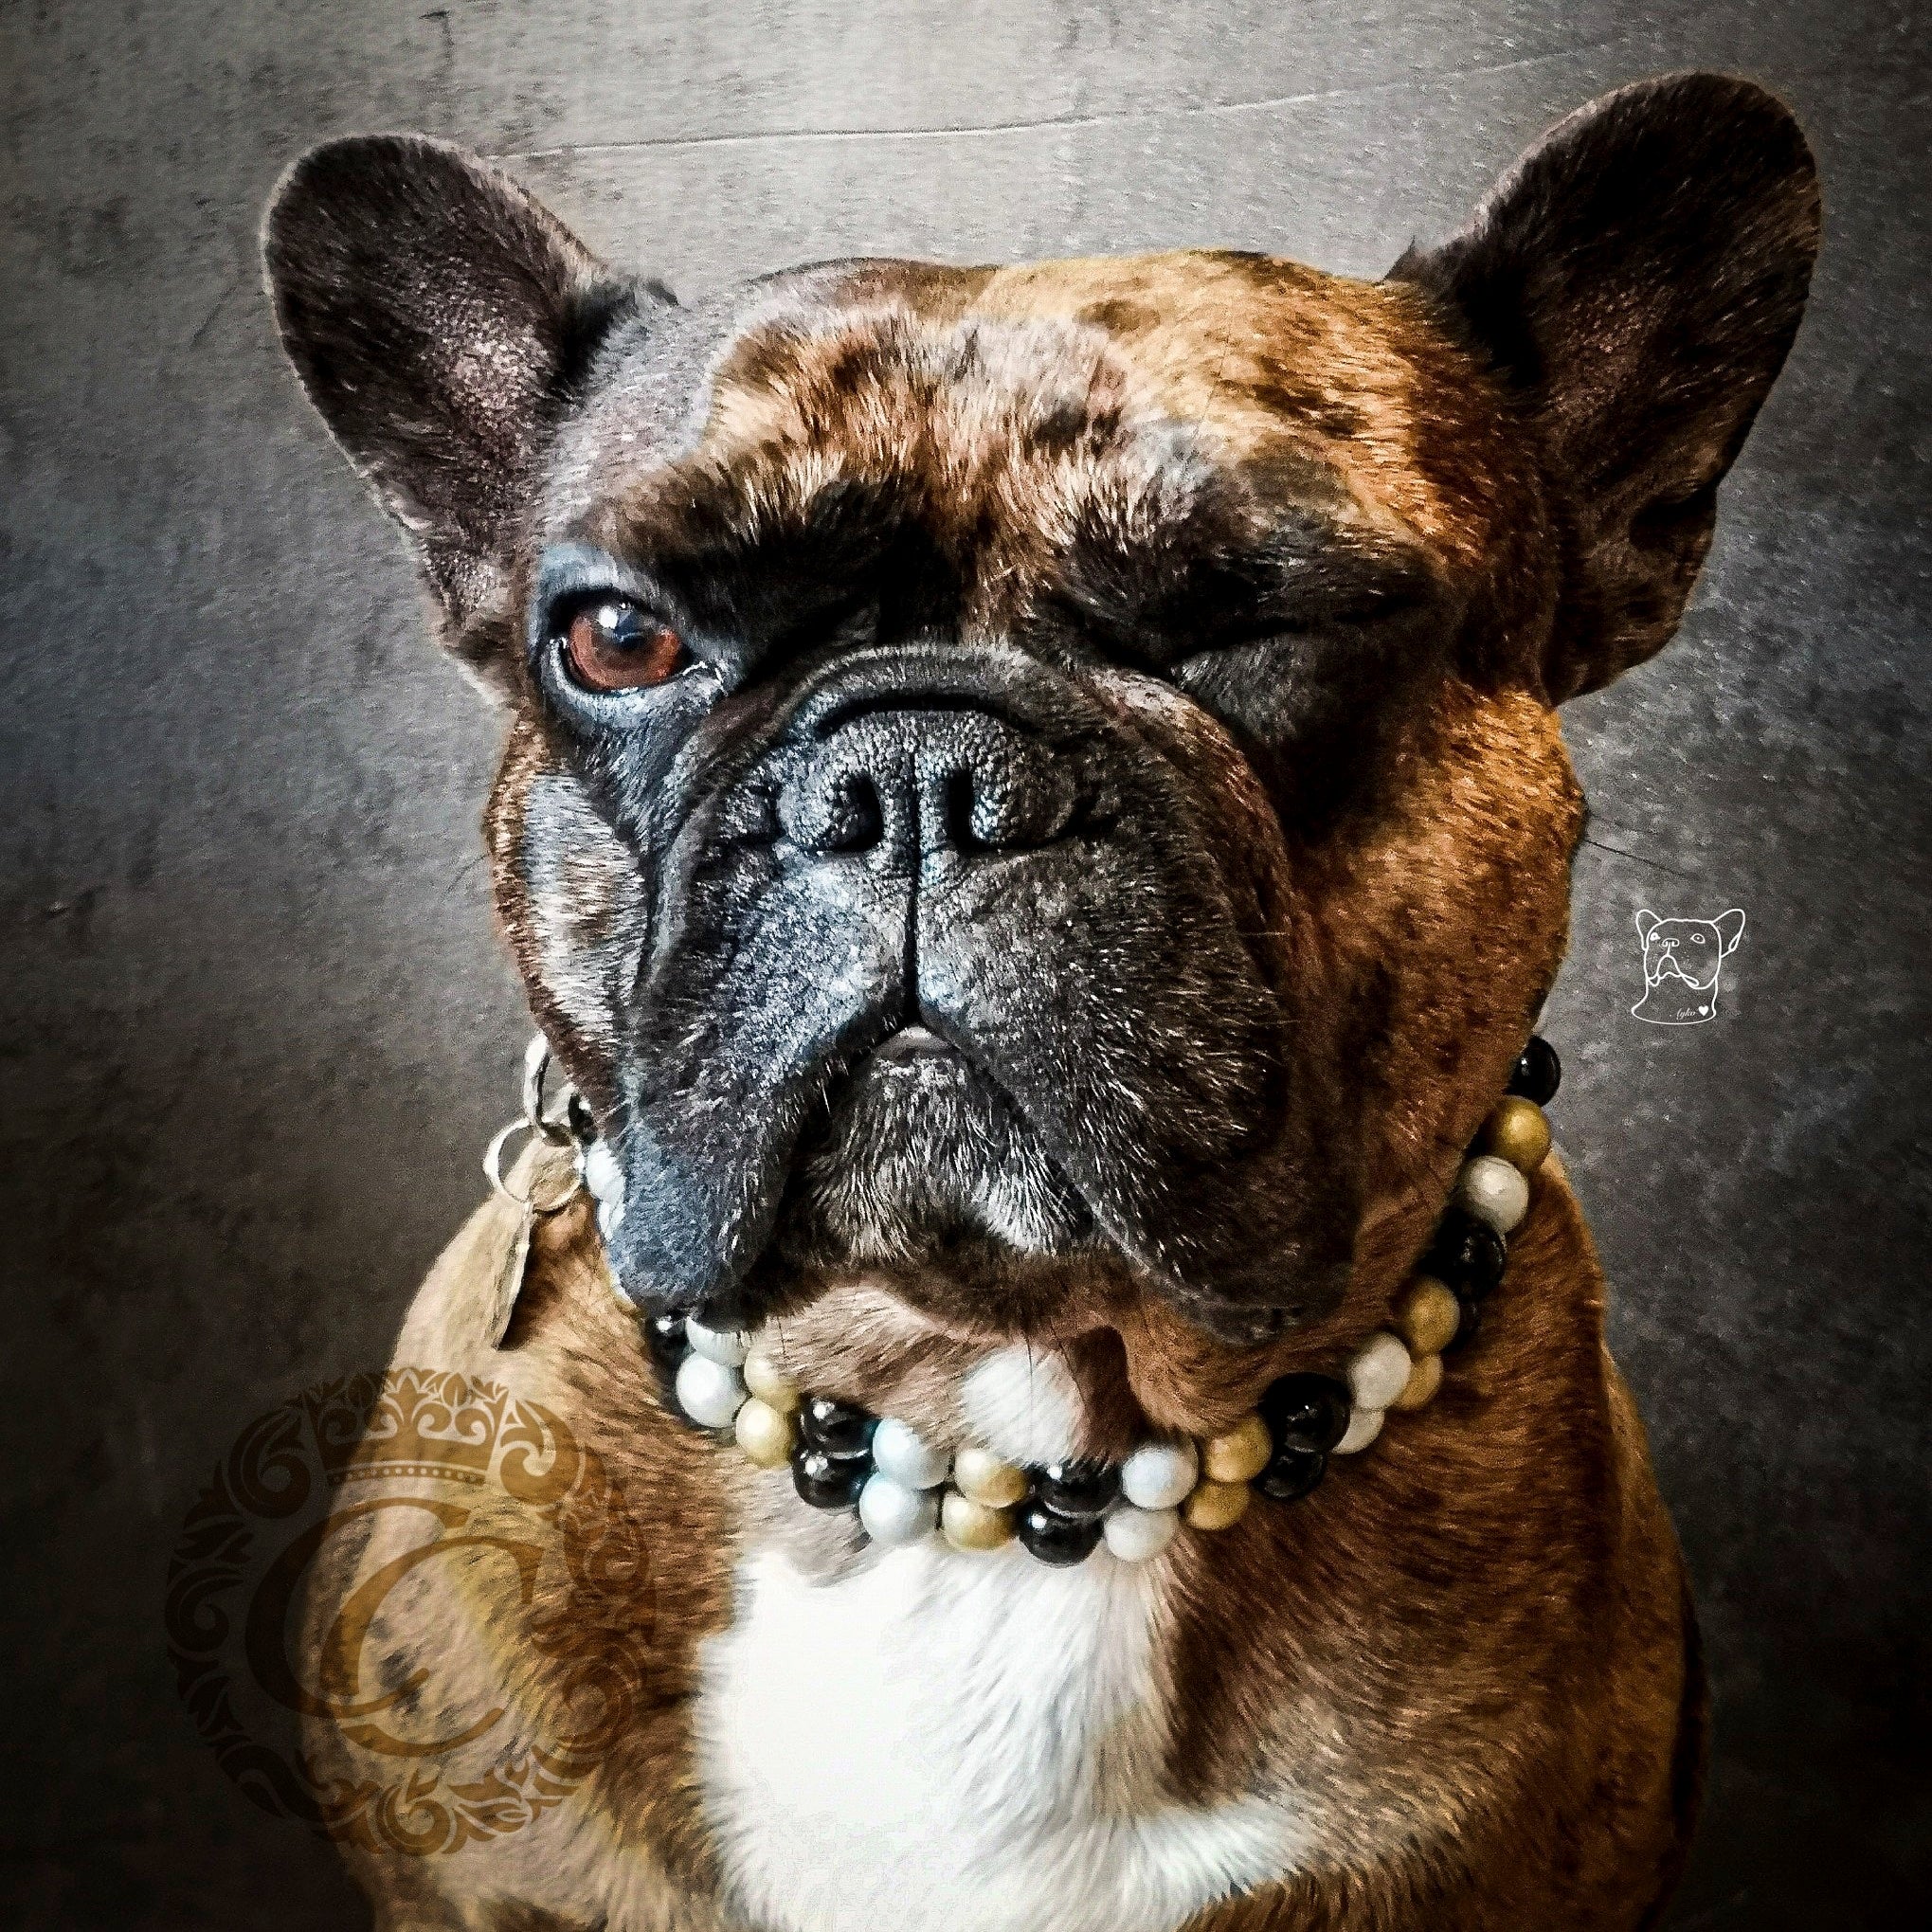 Dog collar Double Black Gold Silver | Handmade dog collars | Luxury dog collars | Custom made collars and leashes | Chic dog collars | Christmas dog collars | Beaded dog collars | Dog collars beads | Collars for dogs | Unbreakable dog necklace